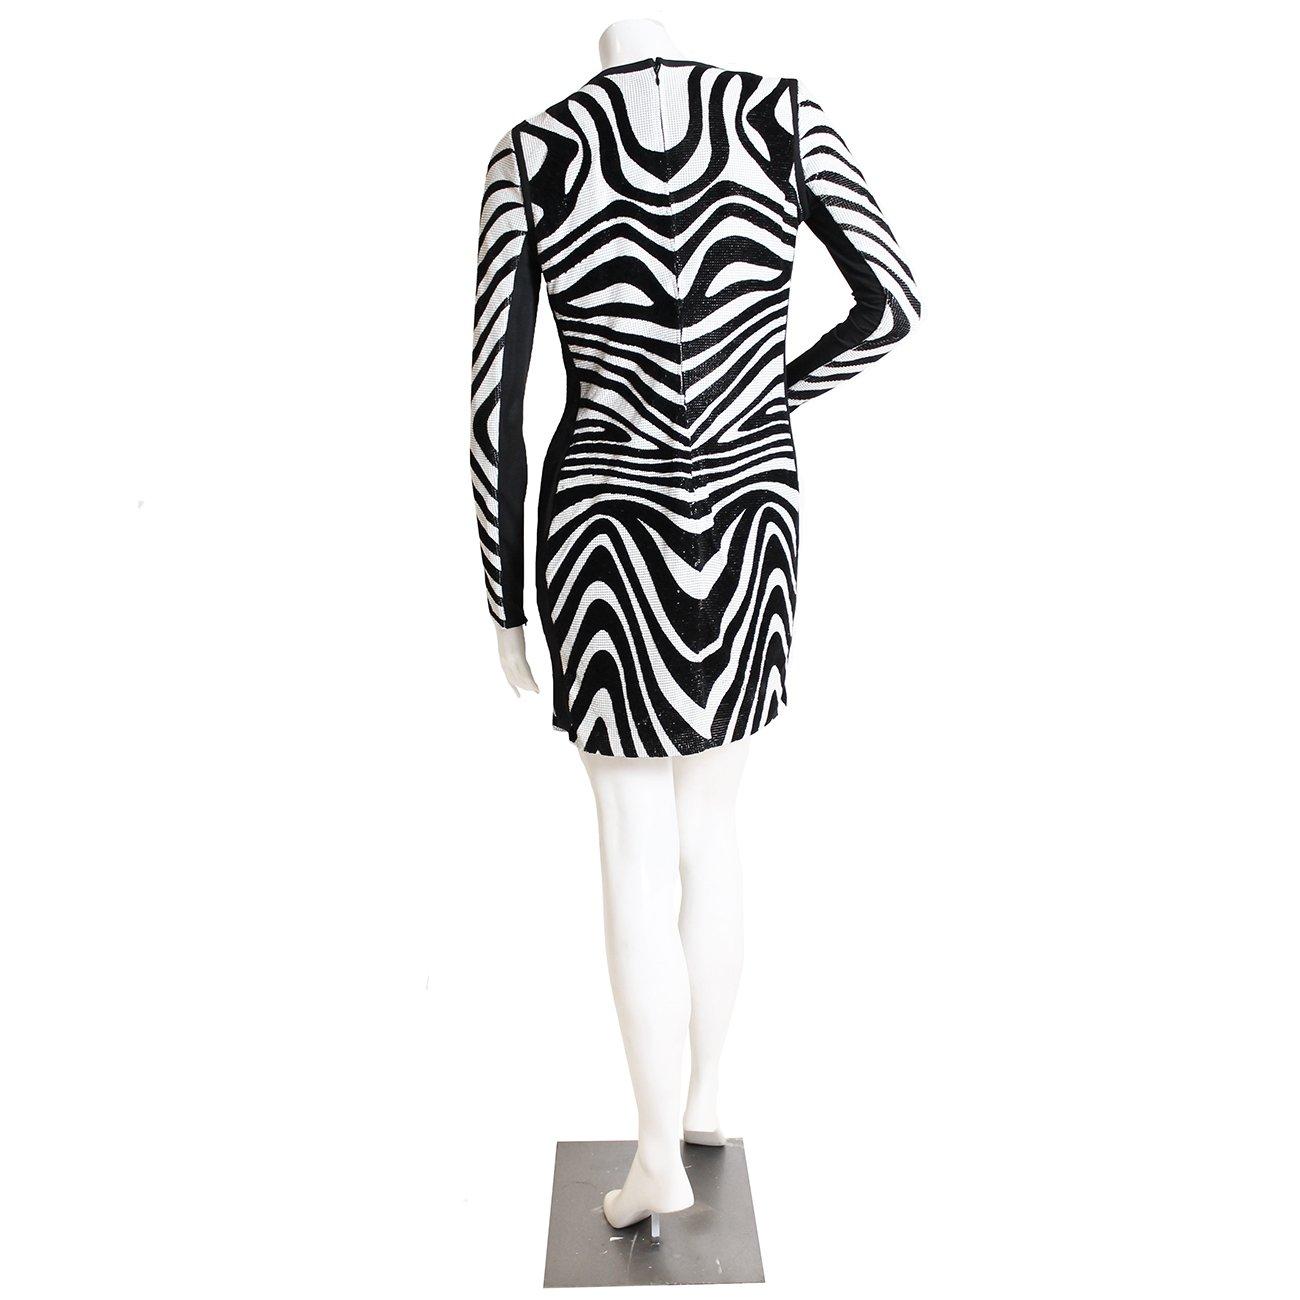 Exclusive Metal Mesh Swirl Dress by Tom Ford
Black and white velvet/metal mesh exterior 
Zipper closure at back and zippers on each cuff
Condition: Excellent, little to no wear 

Size/Measurements:
Size 38 
Sleeve: 25